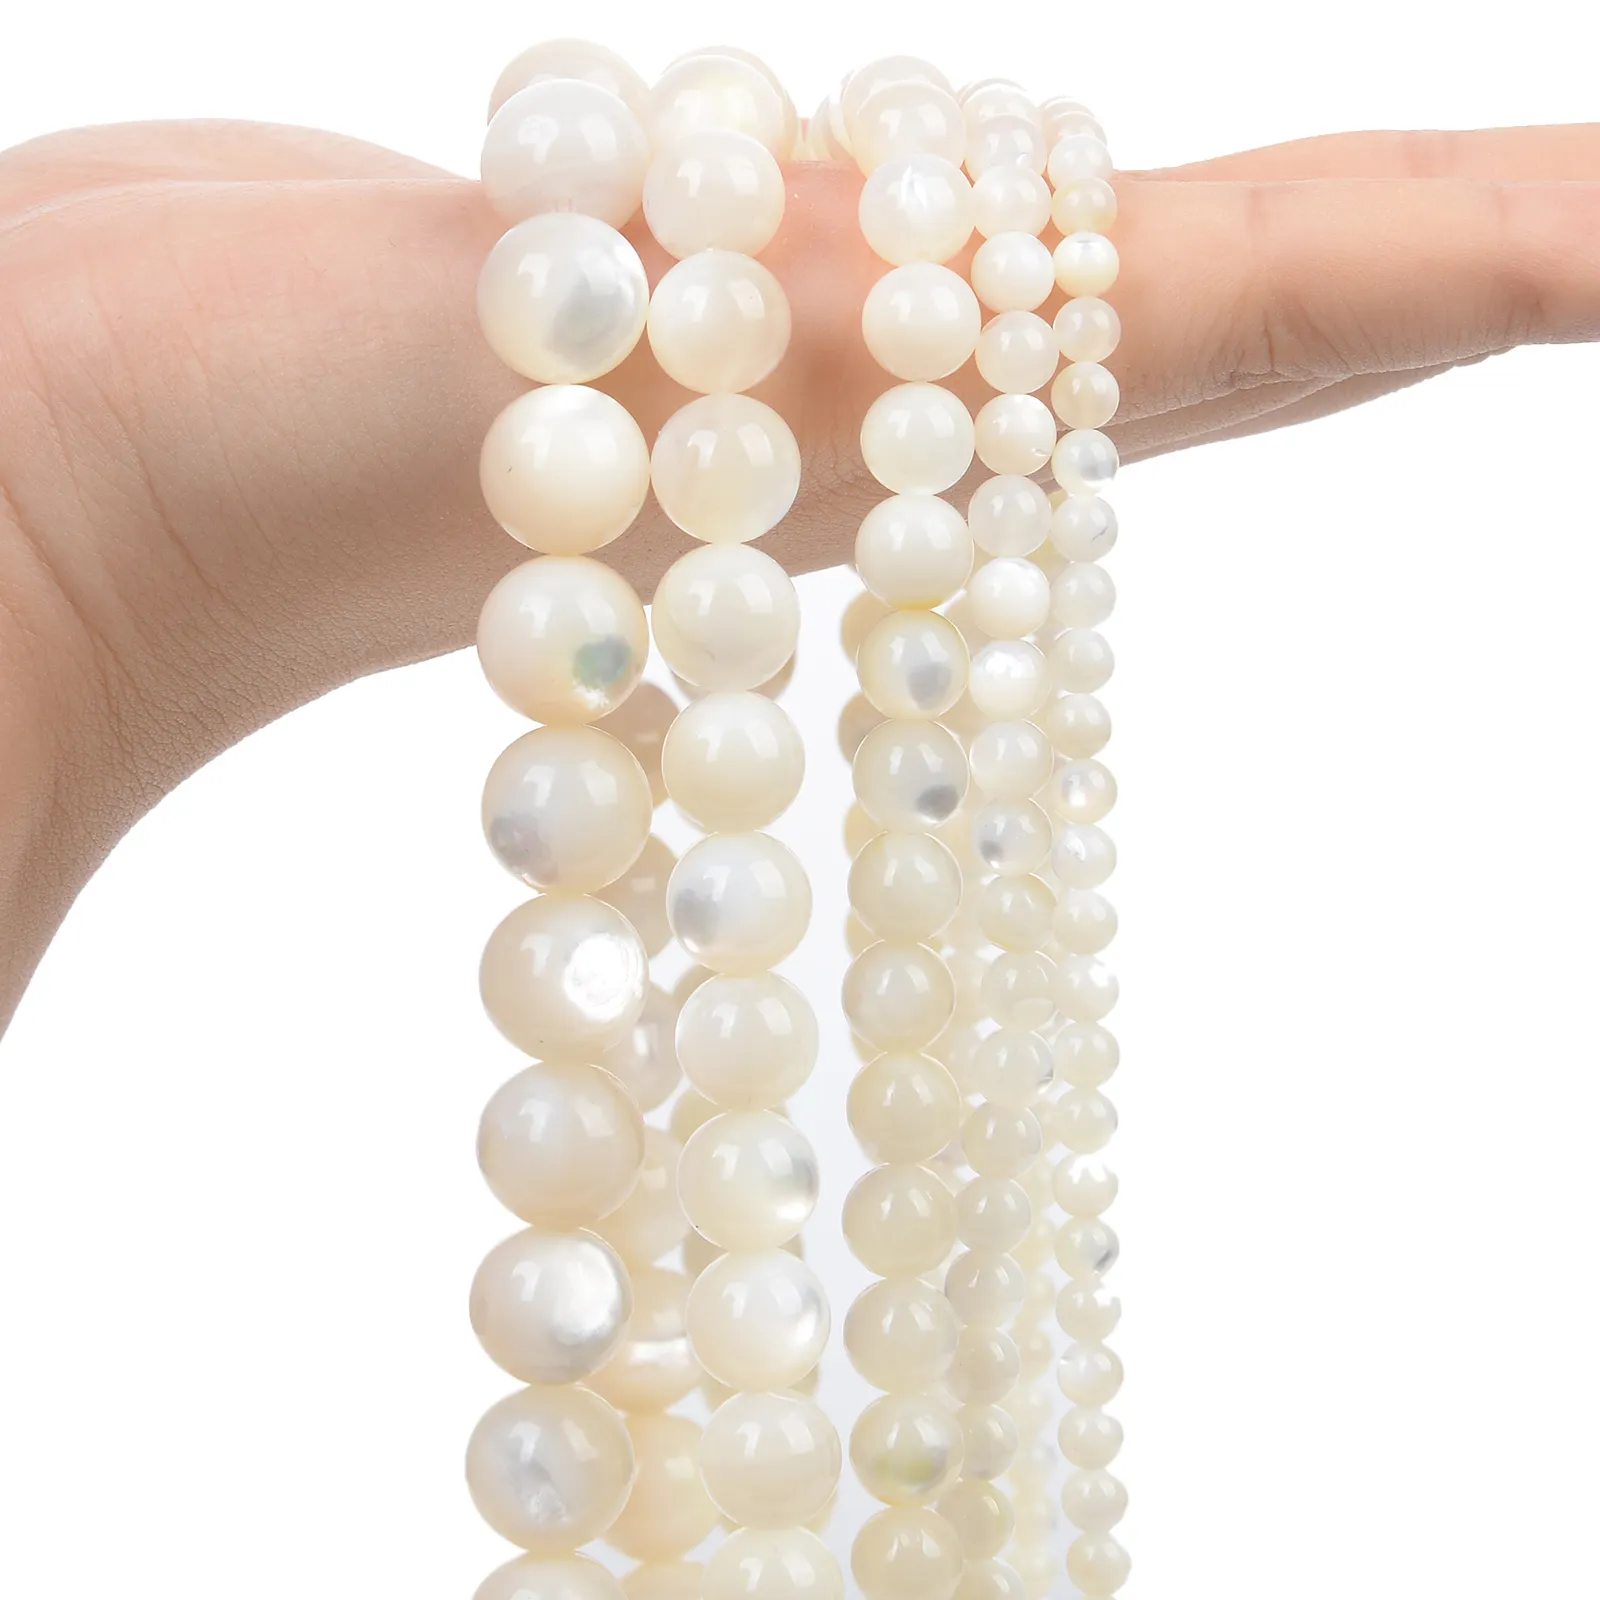 Wholesale 4-12mm Pearls For Jewelry Making Natural Sea Shell White Mother Of Pearl Loose Spacer Beads